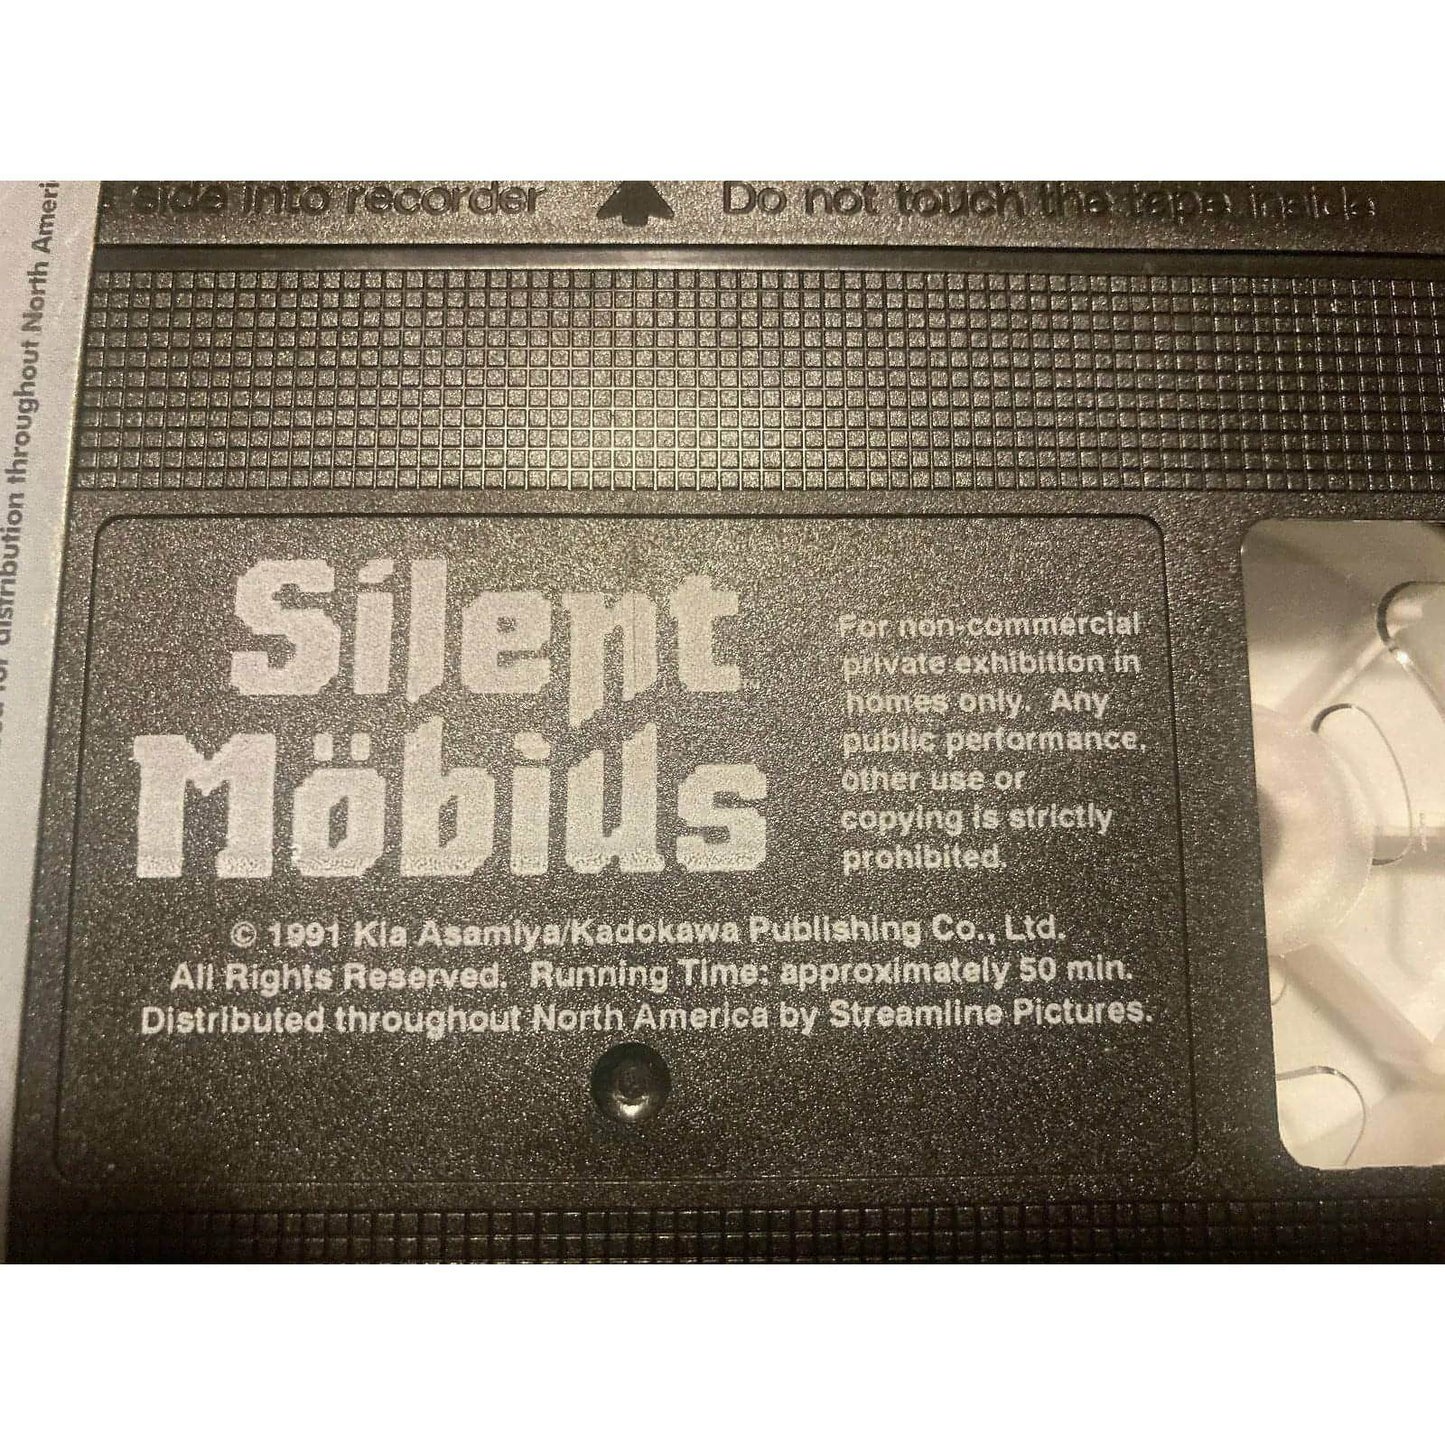 Silent Mobius (VHS 1991) Science Fiction BooksCardsNBikes